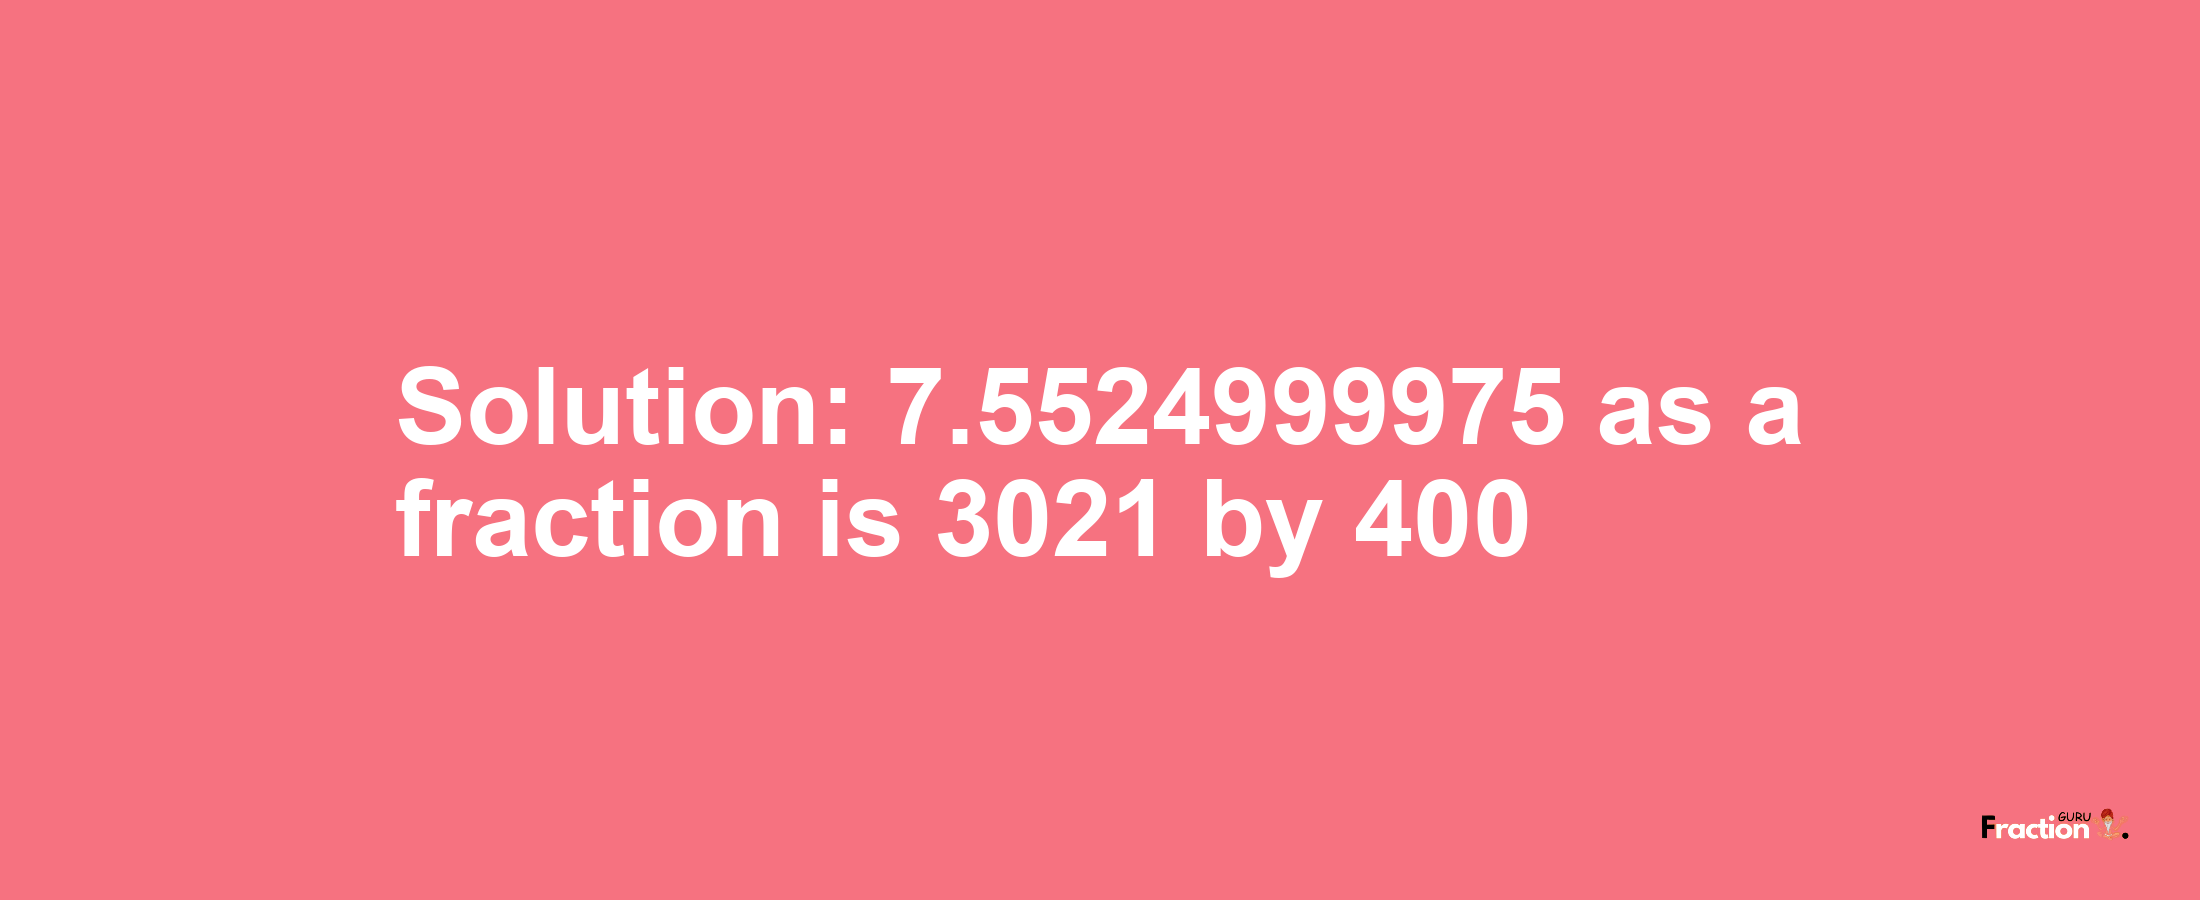 Solution:7.5524999975 as a fraction is 3021/400